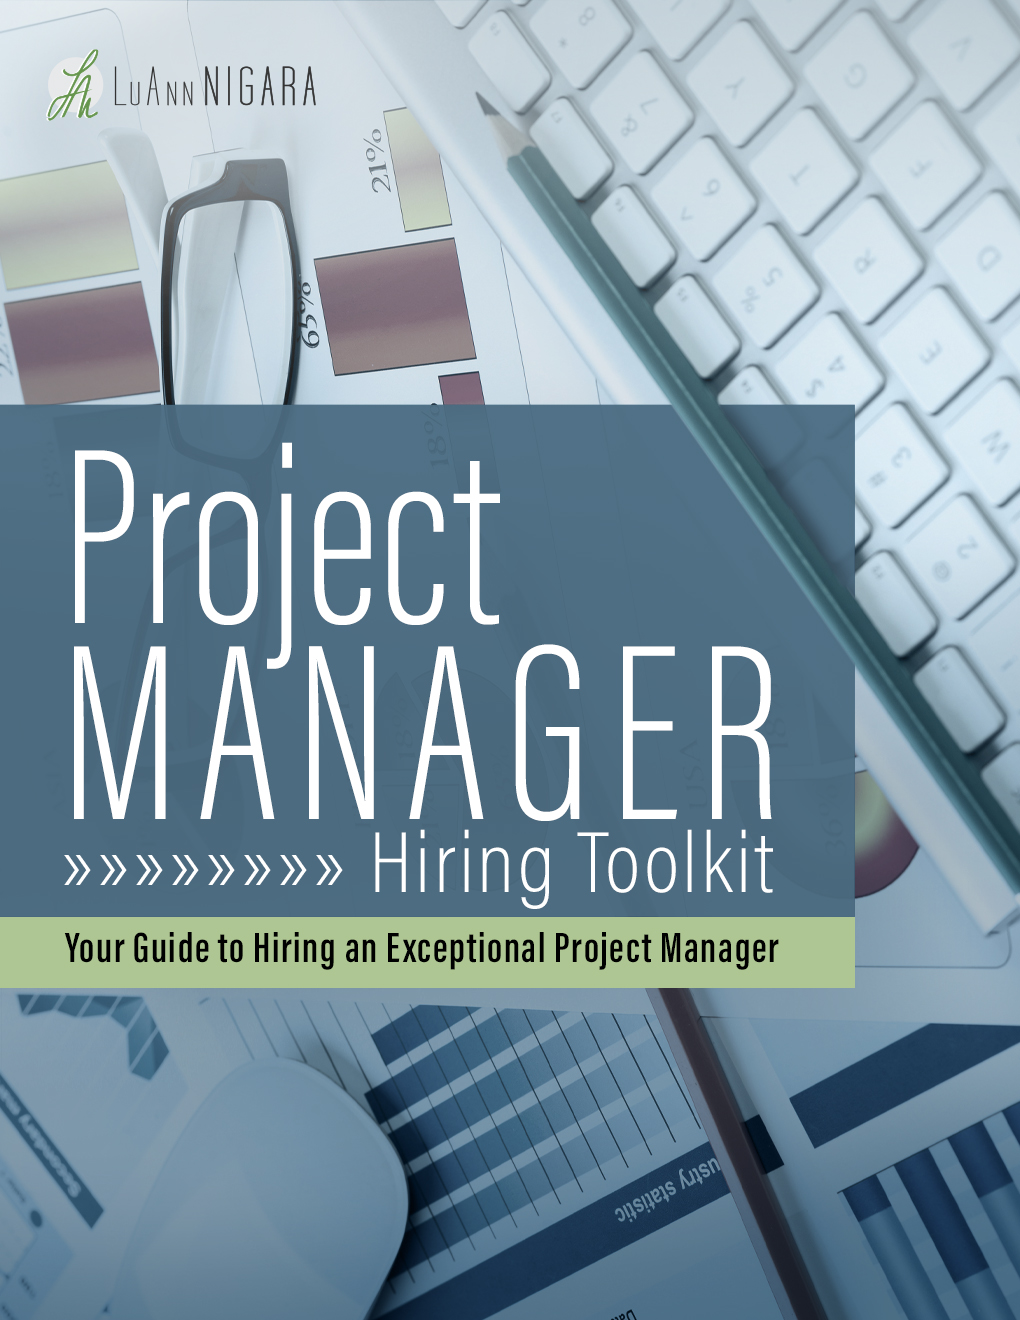 Project Manager Hiring Toolkit